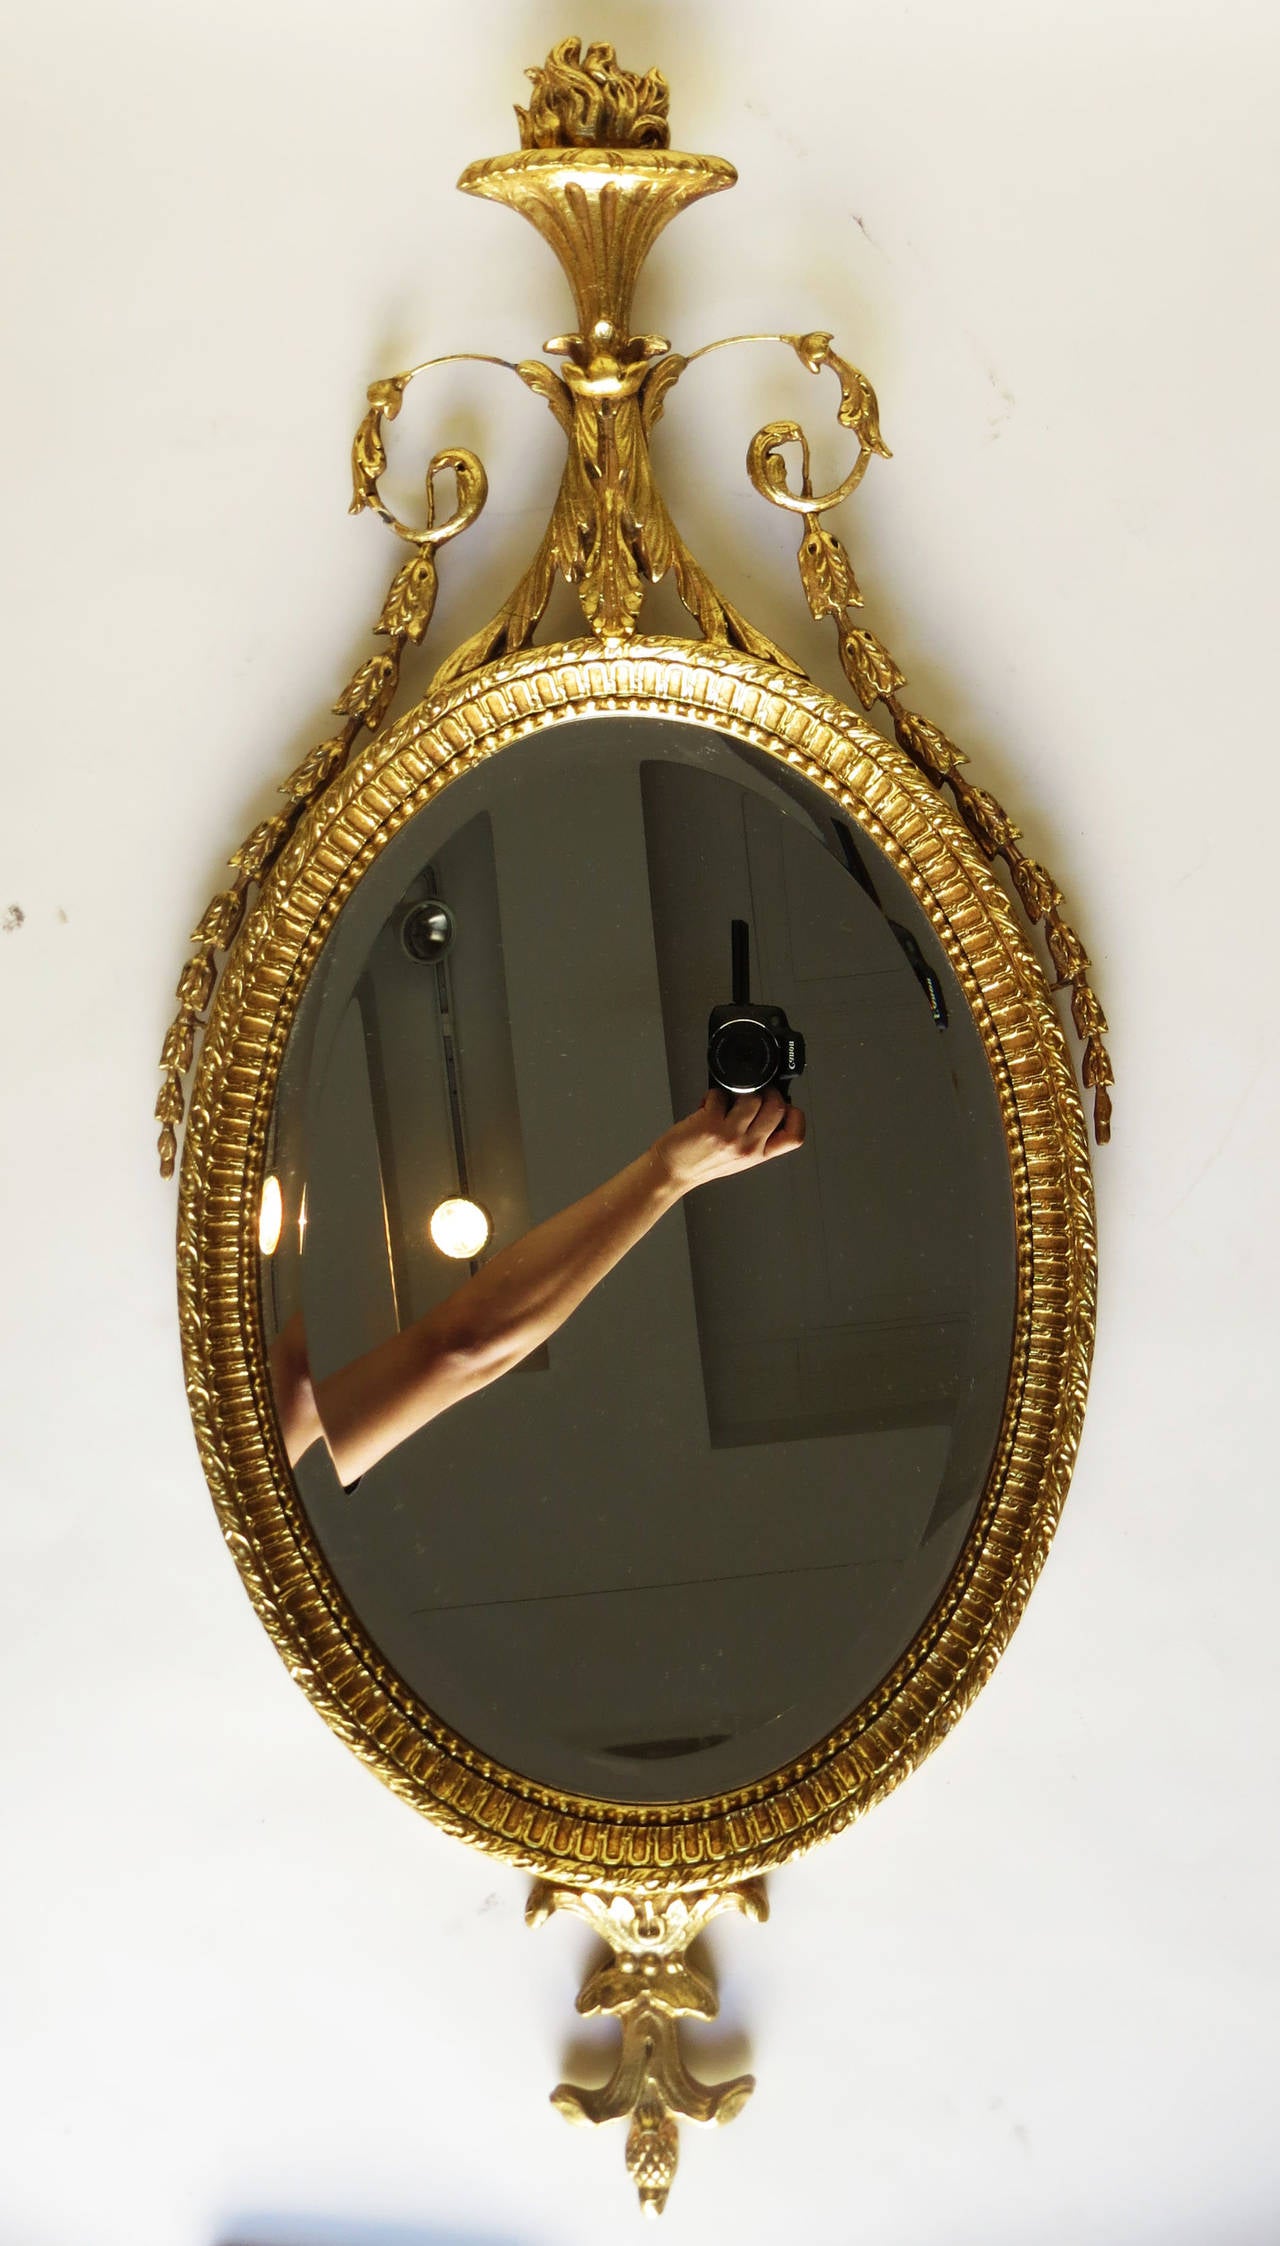 19th century carved gold leaf mirror.